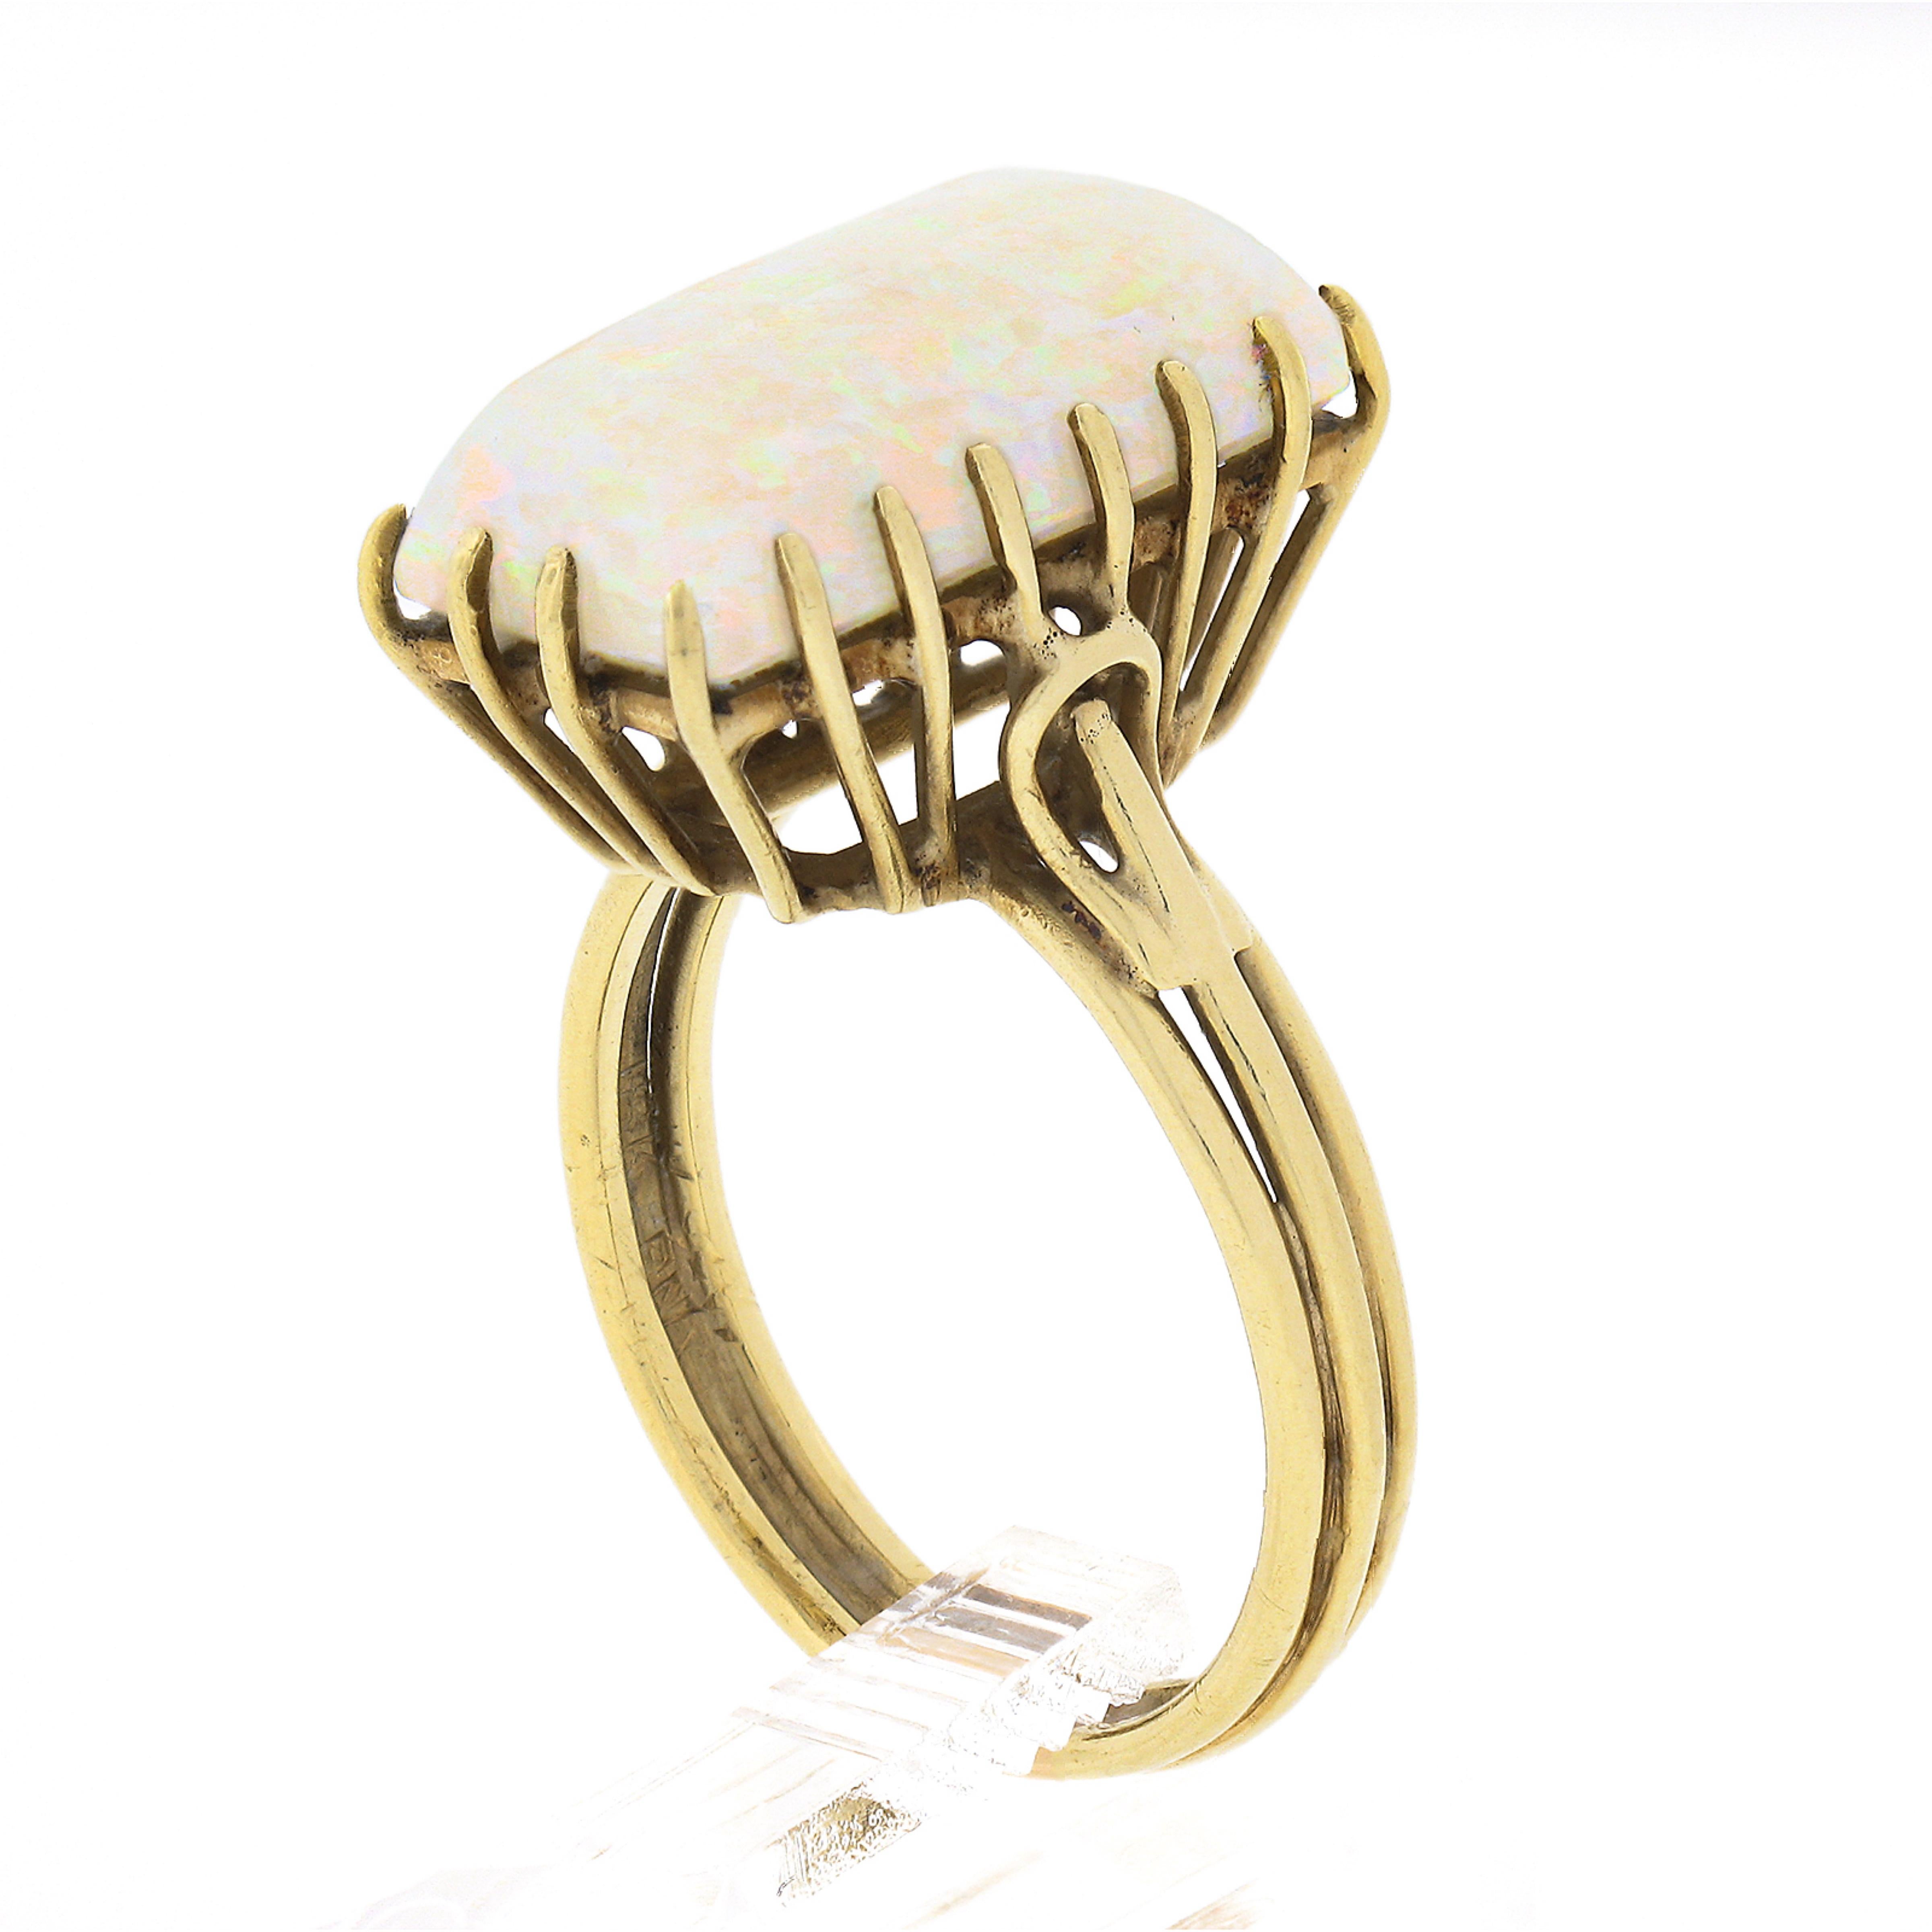 Vintage Handmade 18k Gold Rectangular Cabochon Cut Opal Solitaire Cocktail Ring For Sale 4